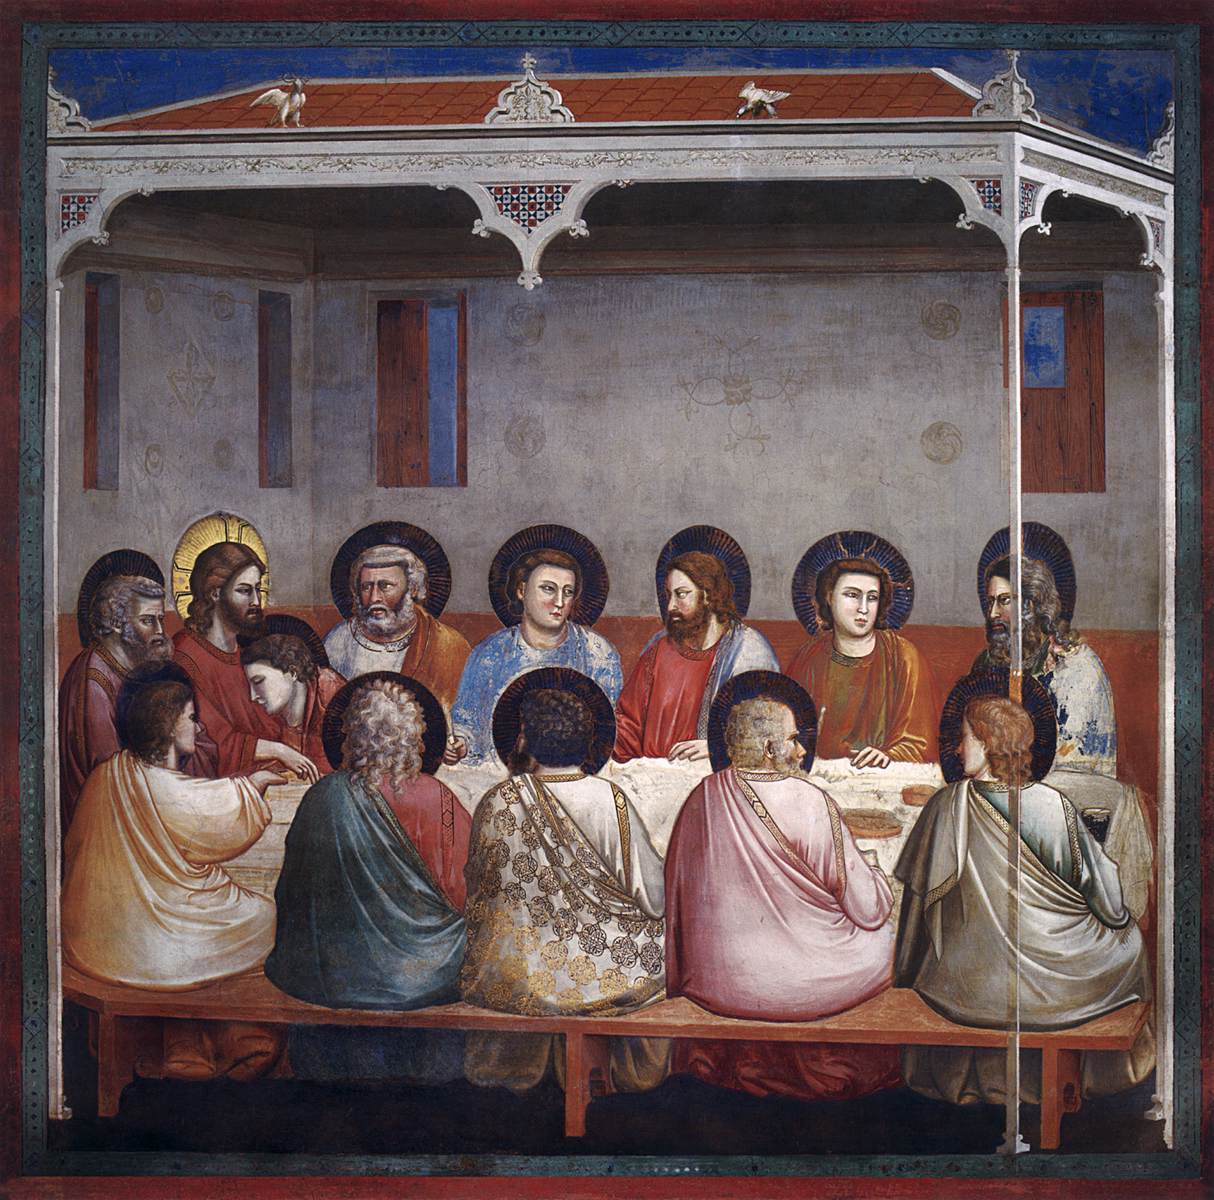 No 29 Scenes from the Life of Christ: 13 Last Supper